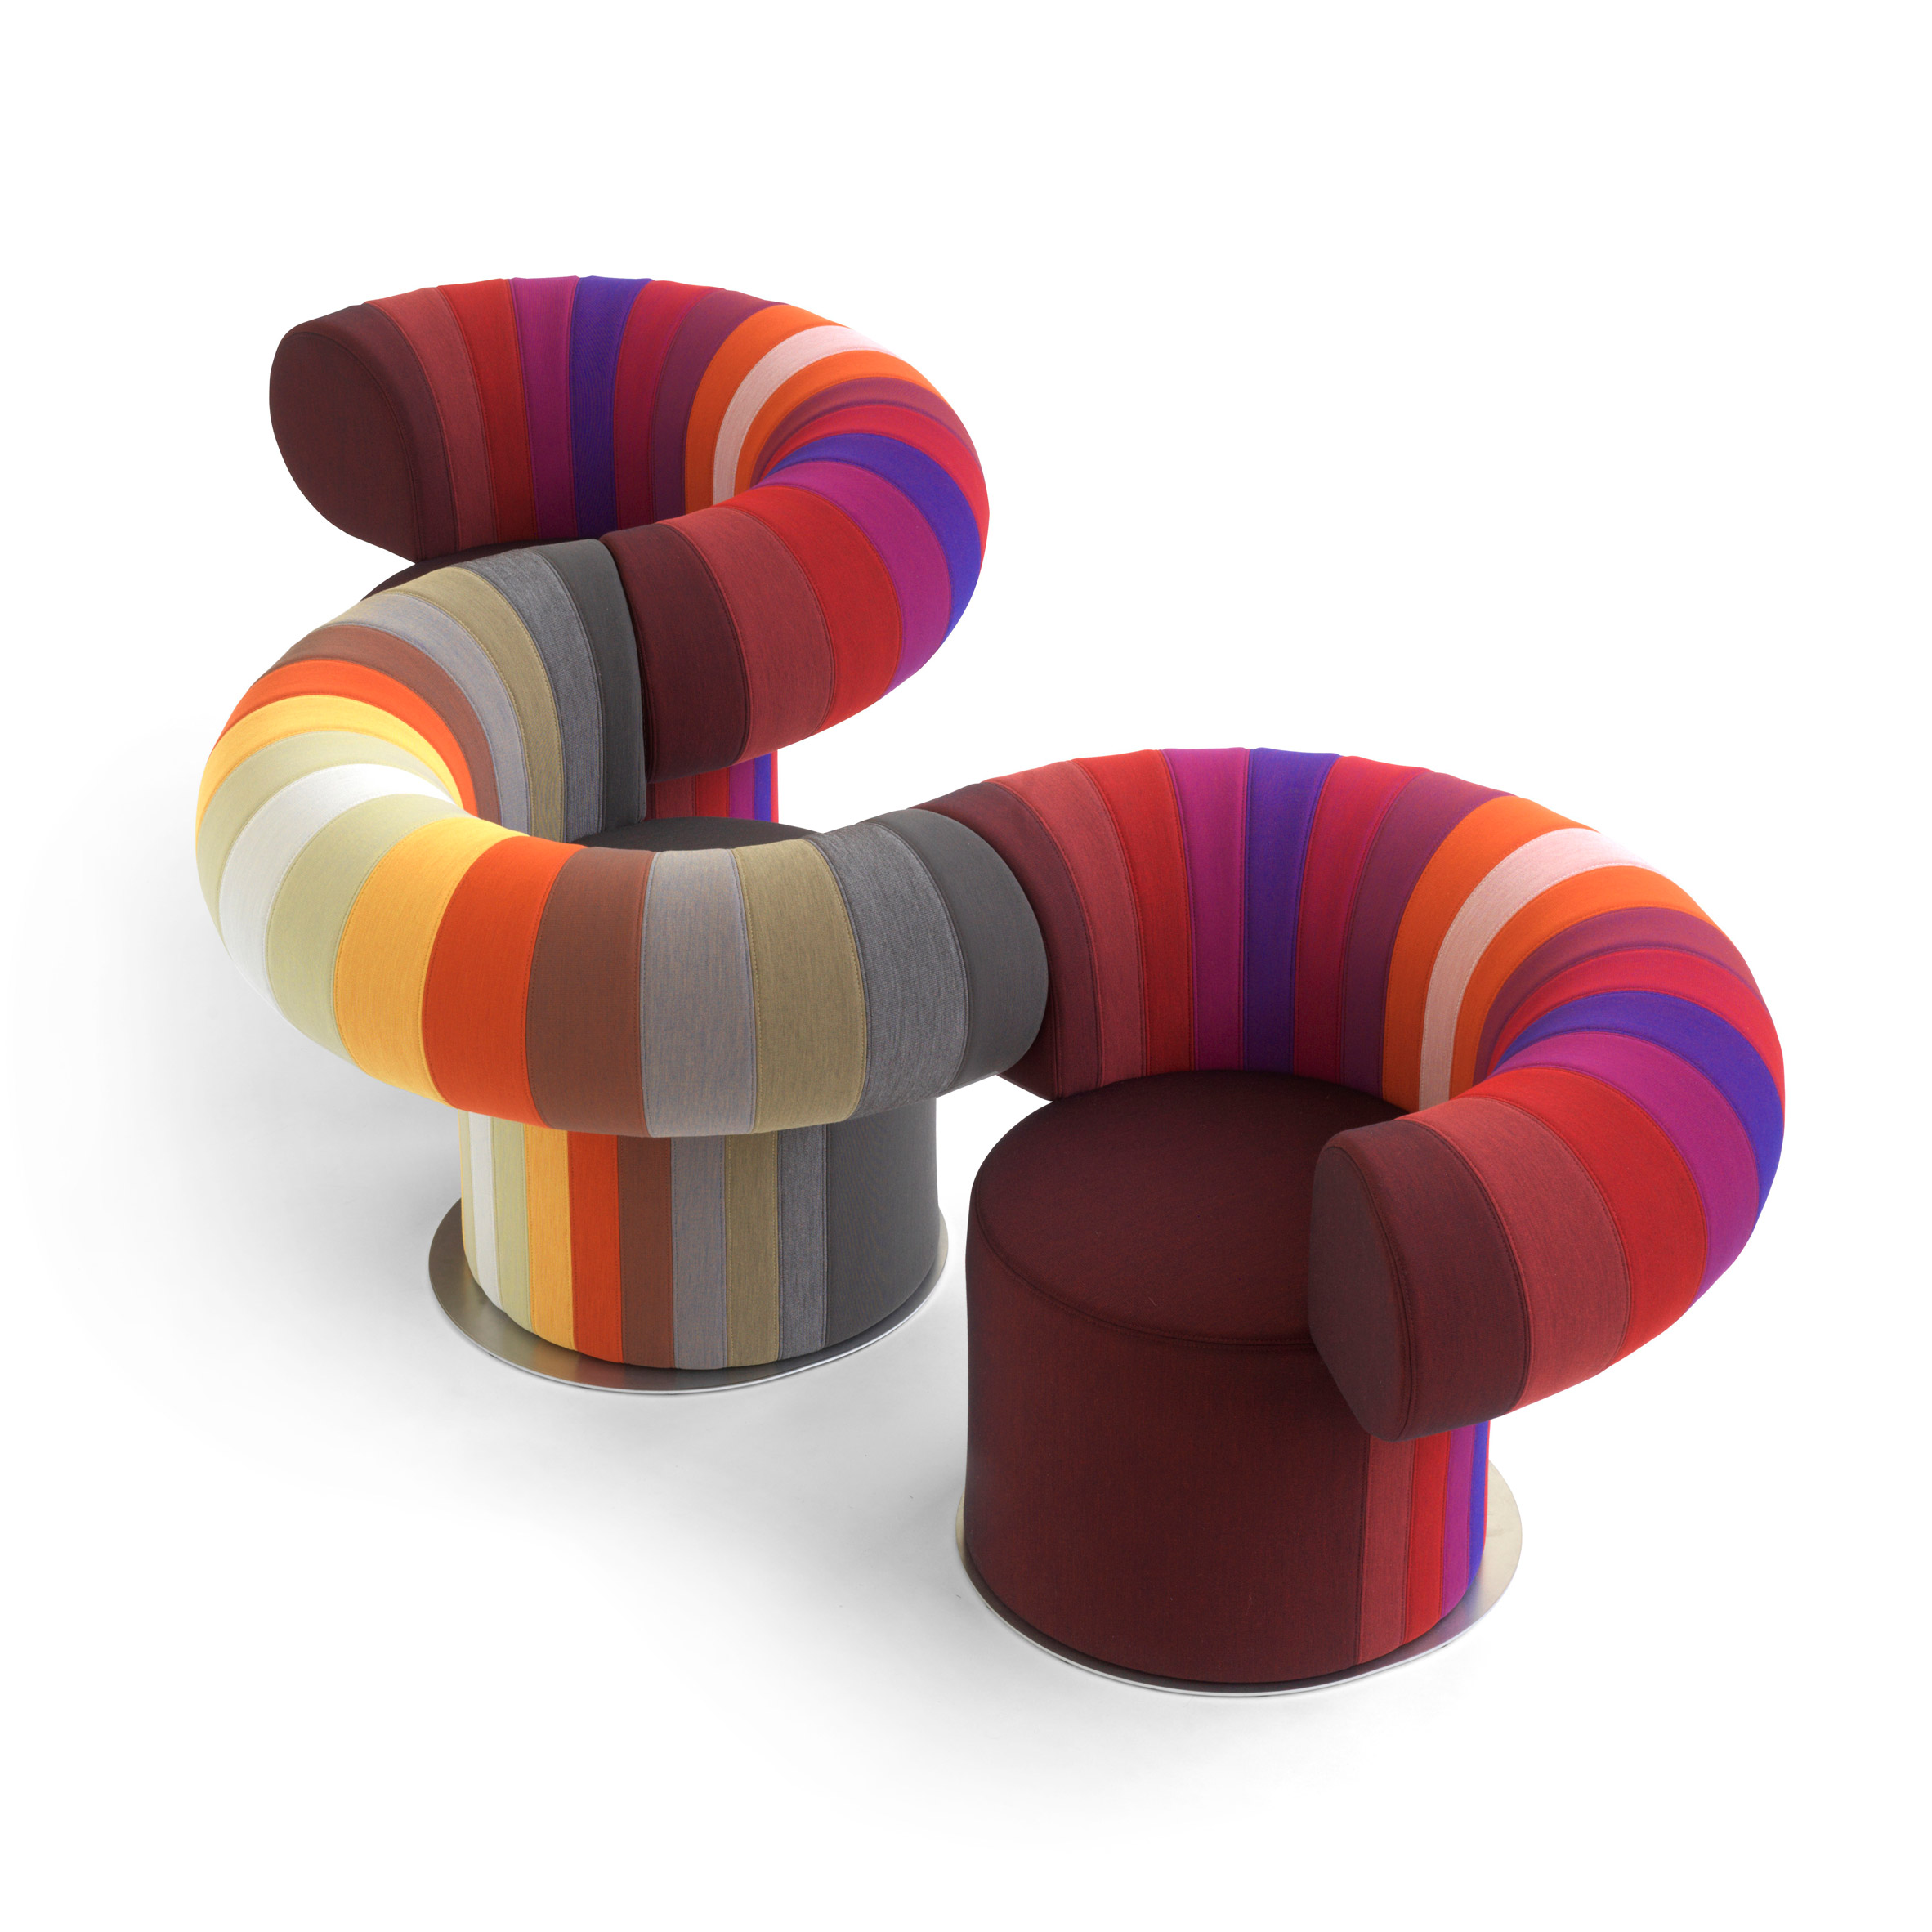 Two lounge chairs by Bla Station